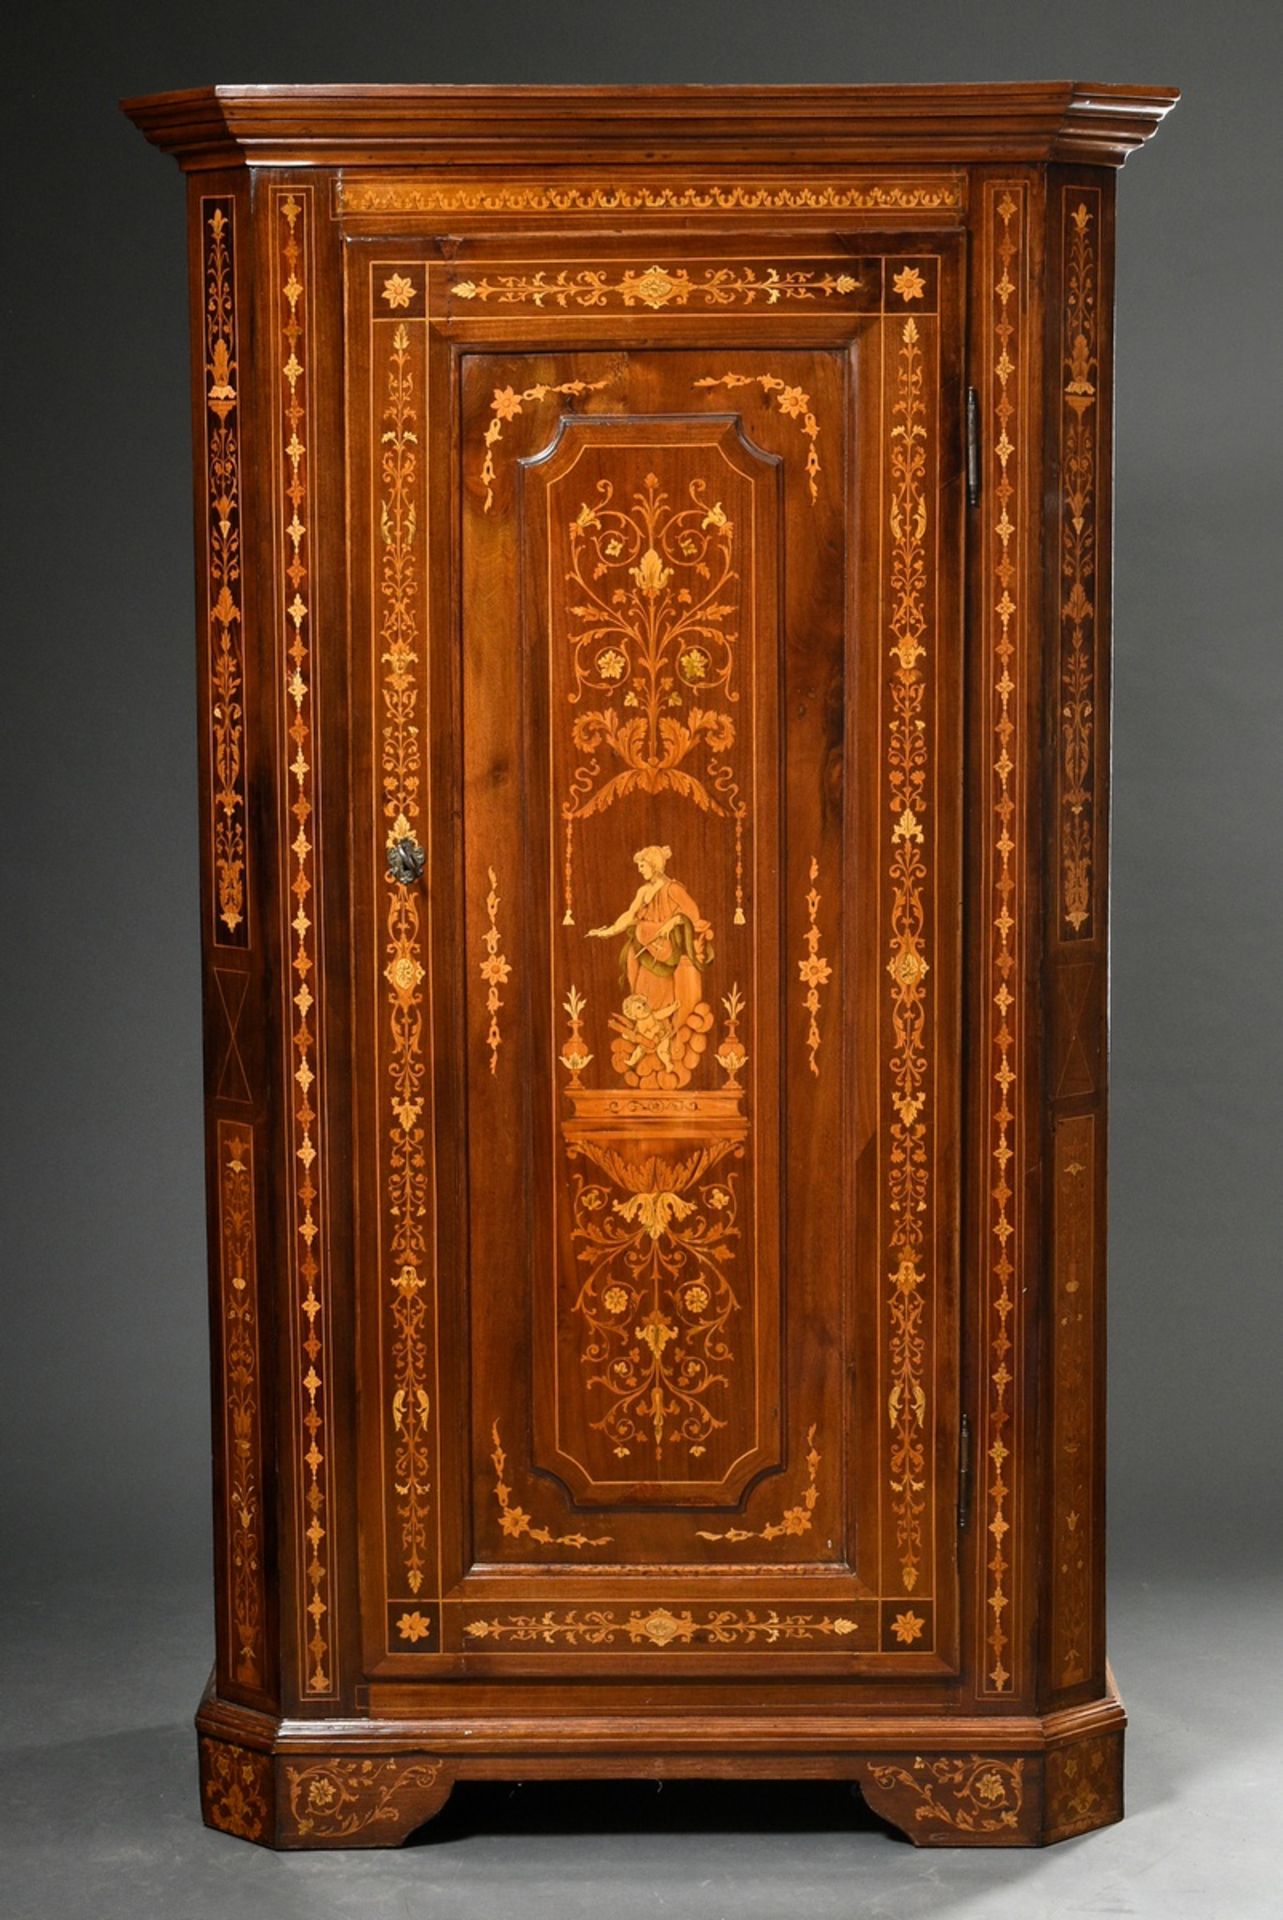 Splendid single-door cabinet with detailed inlays "Allegorical female figures" in classicistic orna - Image 2 of 13